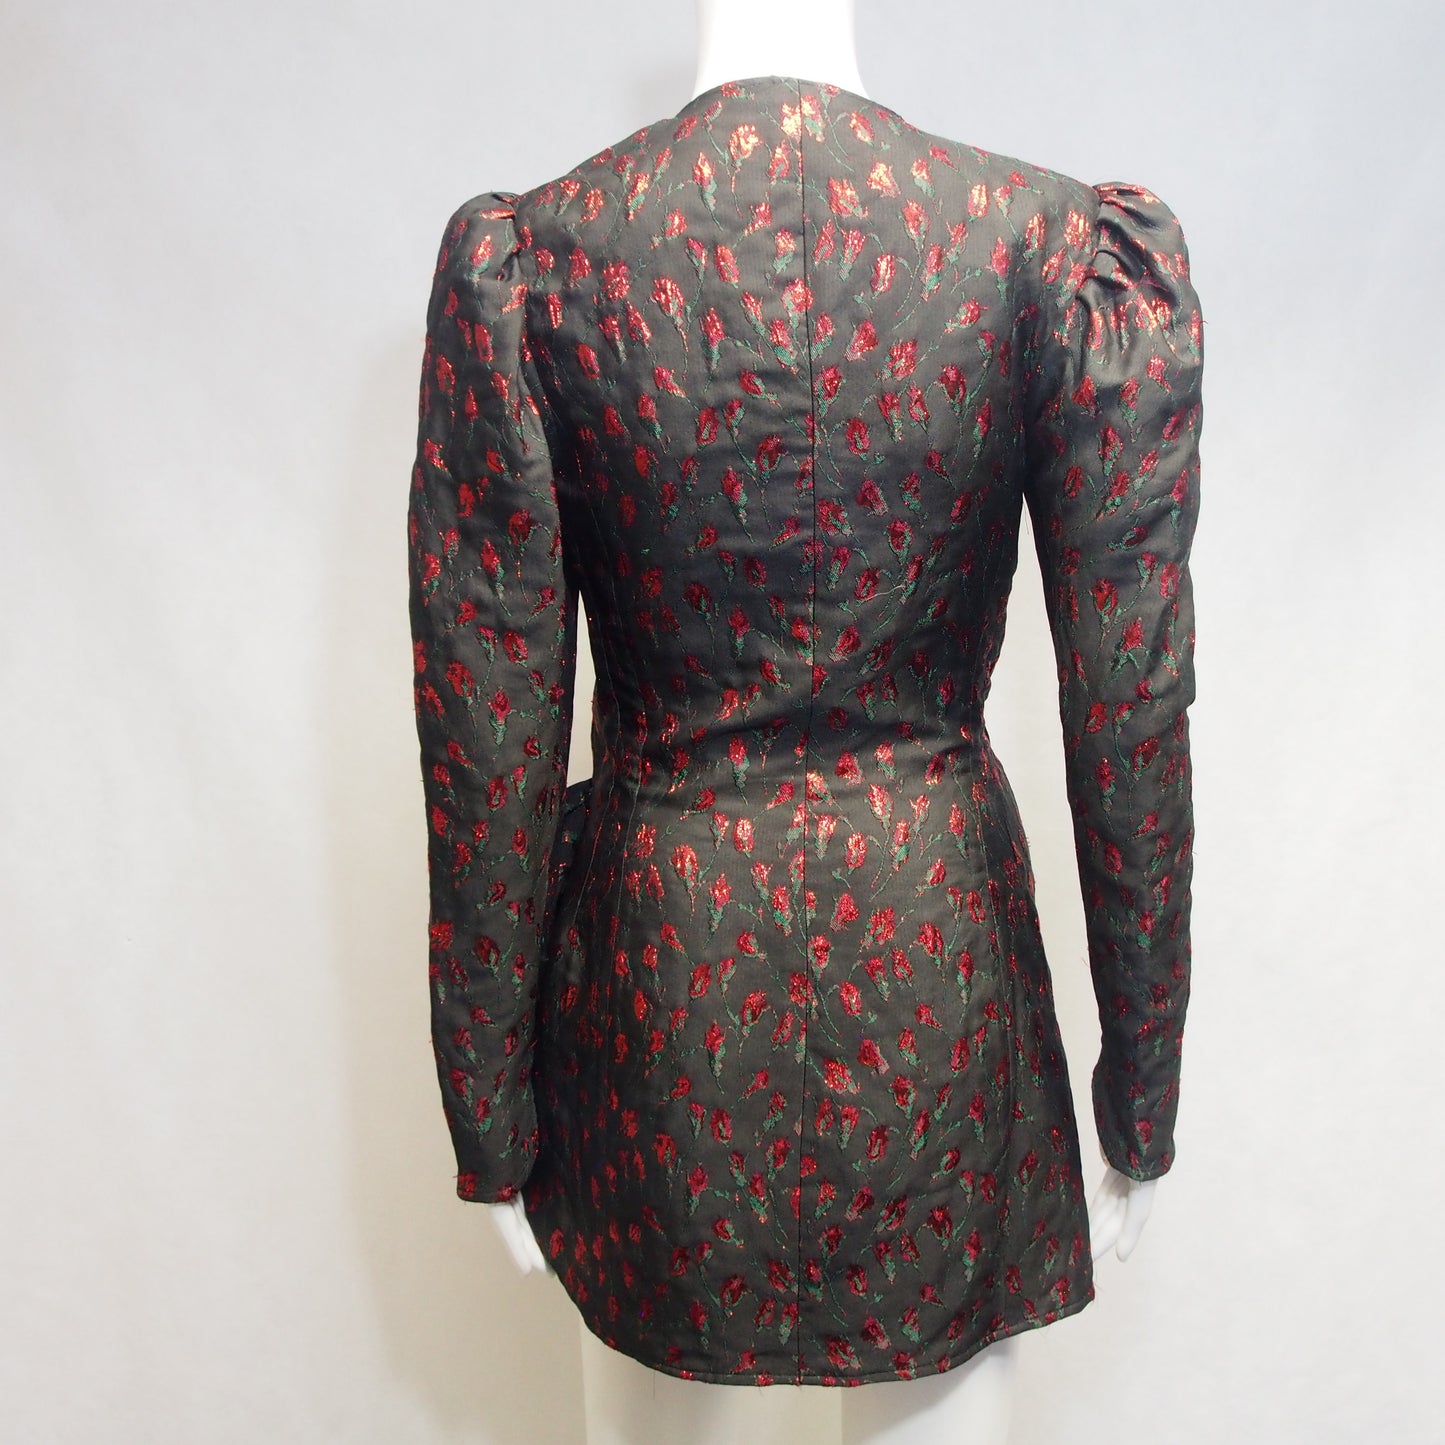 THE ATTICO BLACK AND RED FLORAL PATTERNED WRAP DRESS - SIZE 40 uk 8